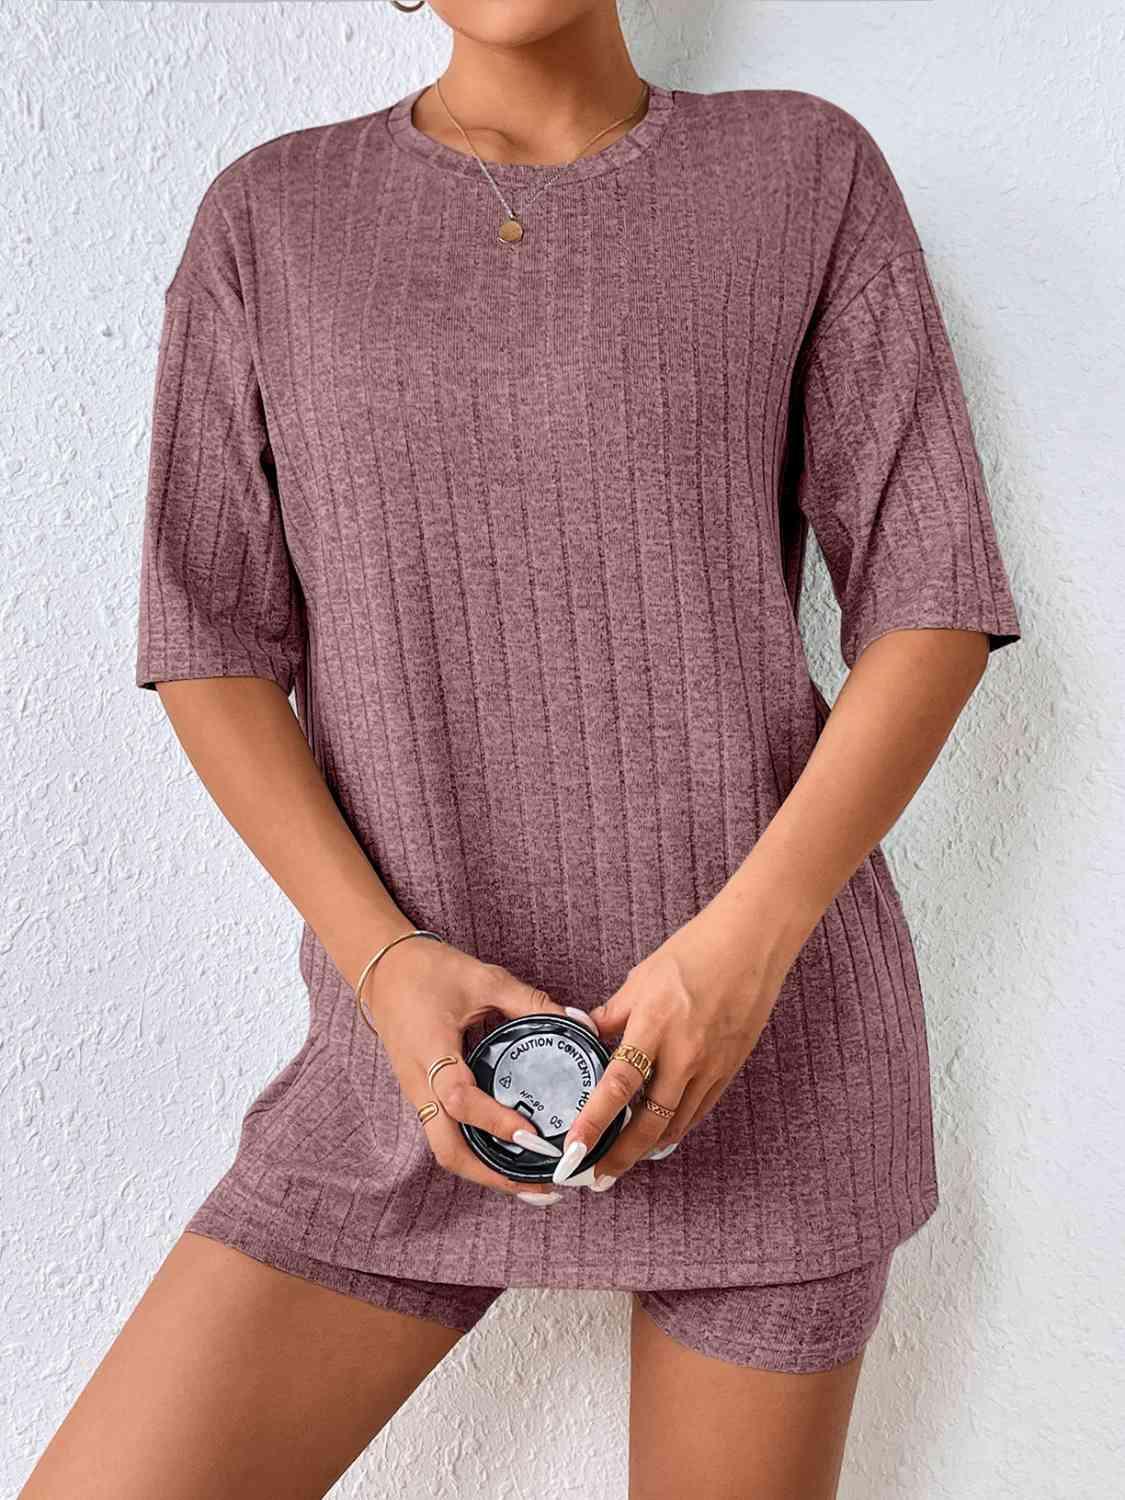 Textured Chic Half Sleeve Top and Shorts Ensemble - God's Girl Gifts And Apparel